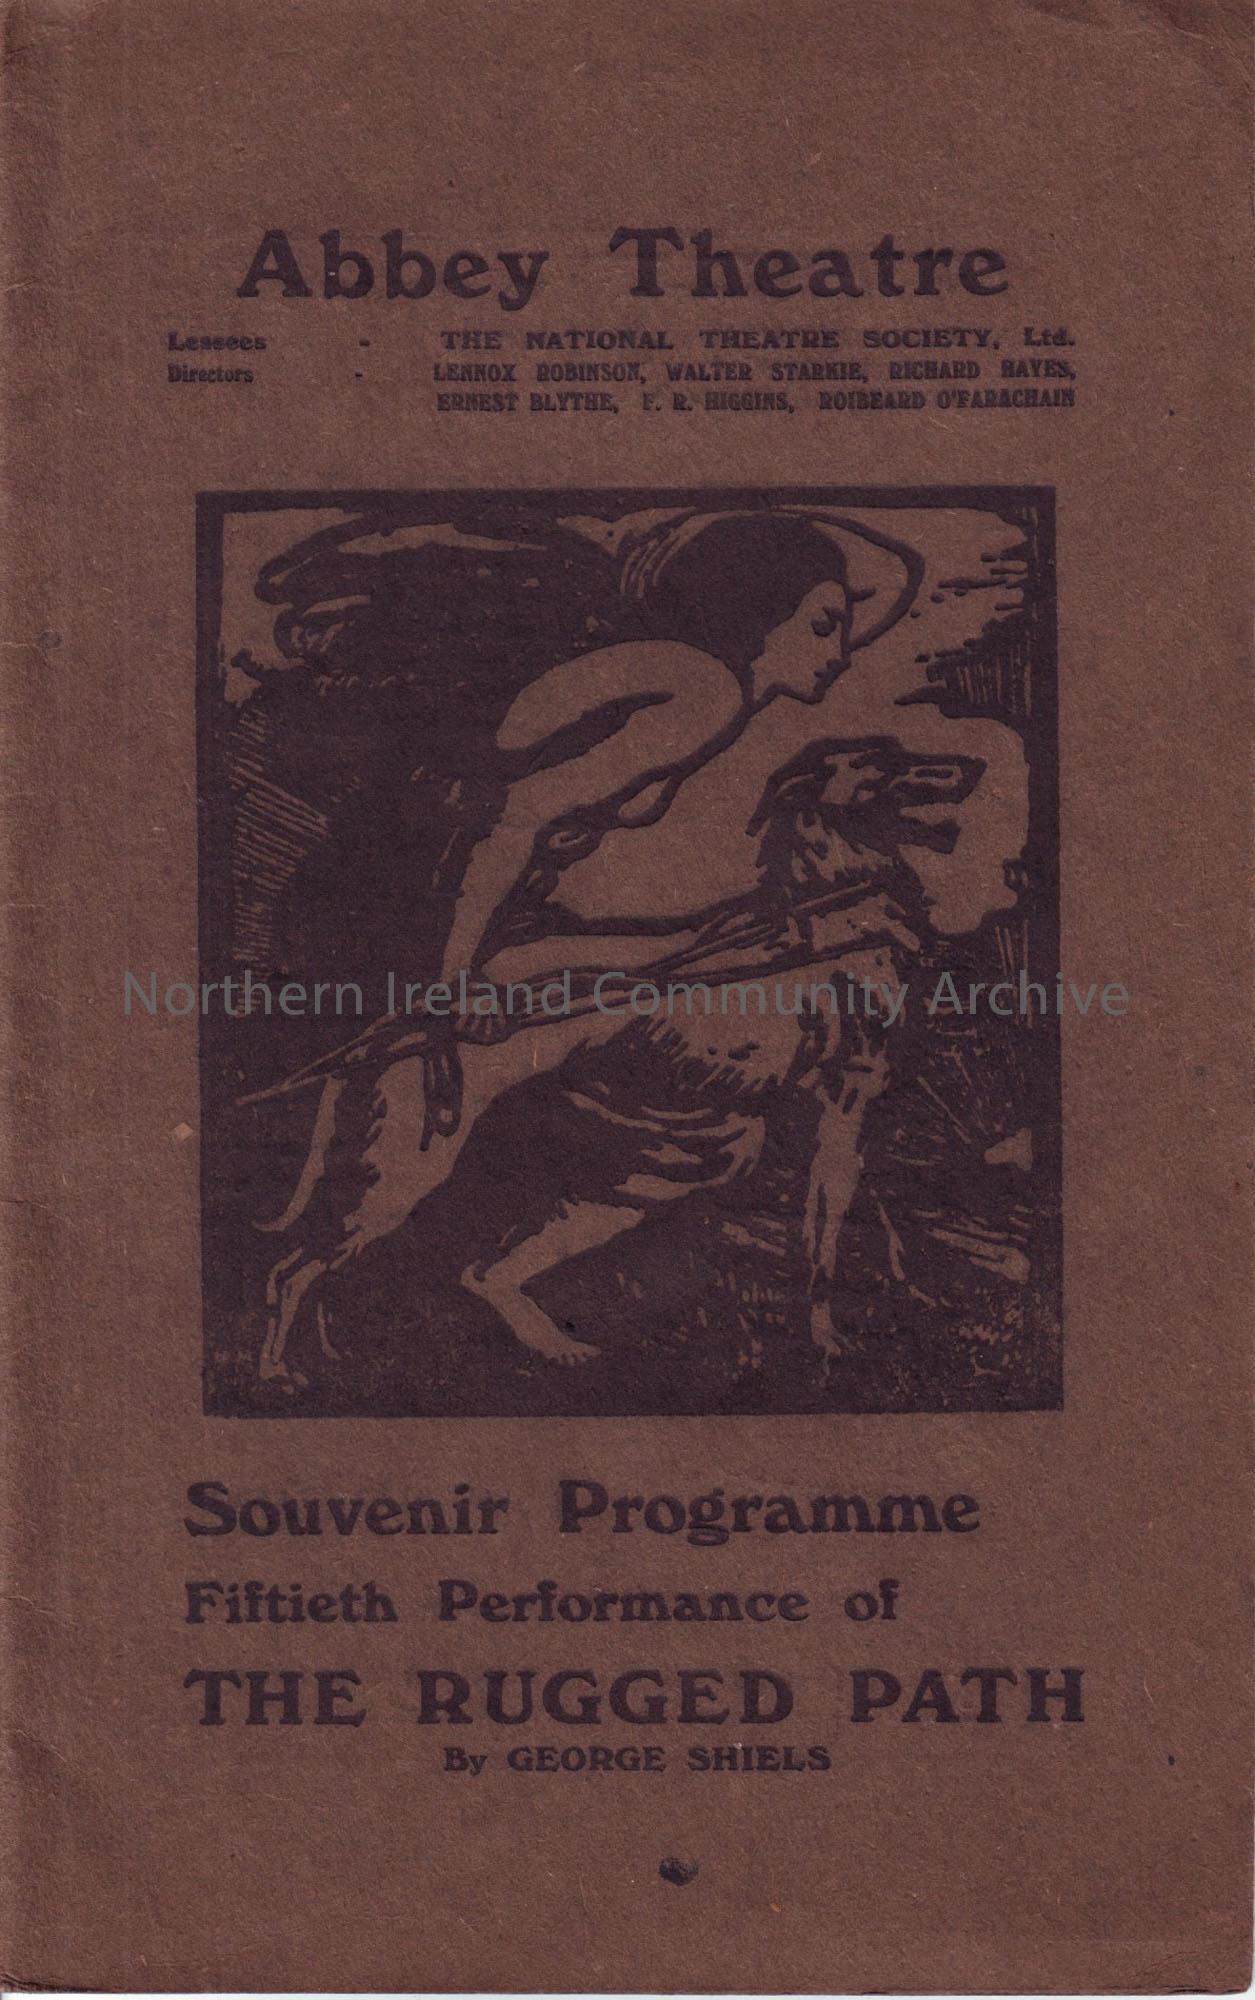 Souvenir programme from the 50th performance of the Rugged Path, by George Shiels, at the Abbey Theatre. 1st October 1940.